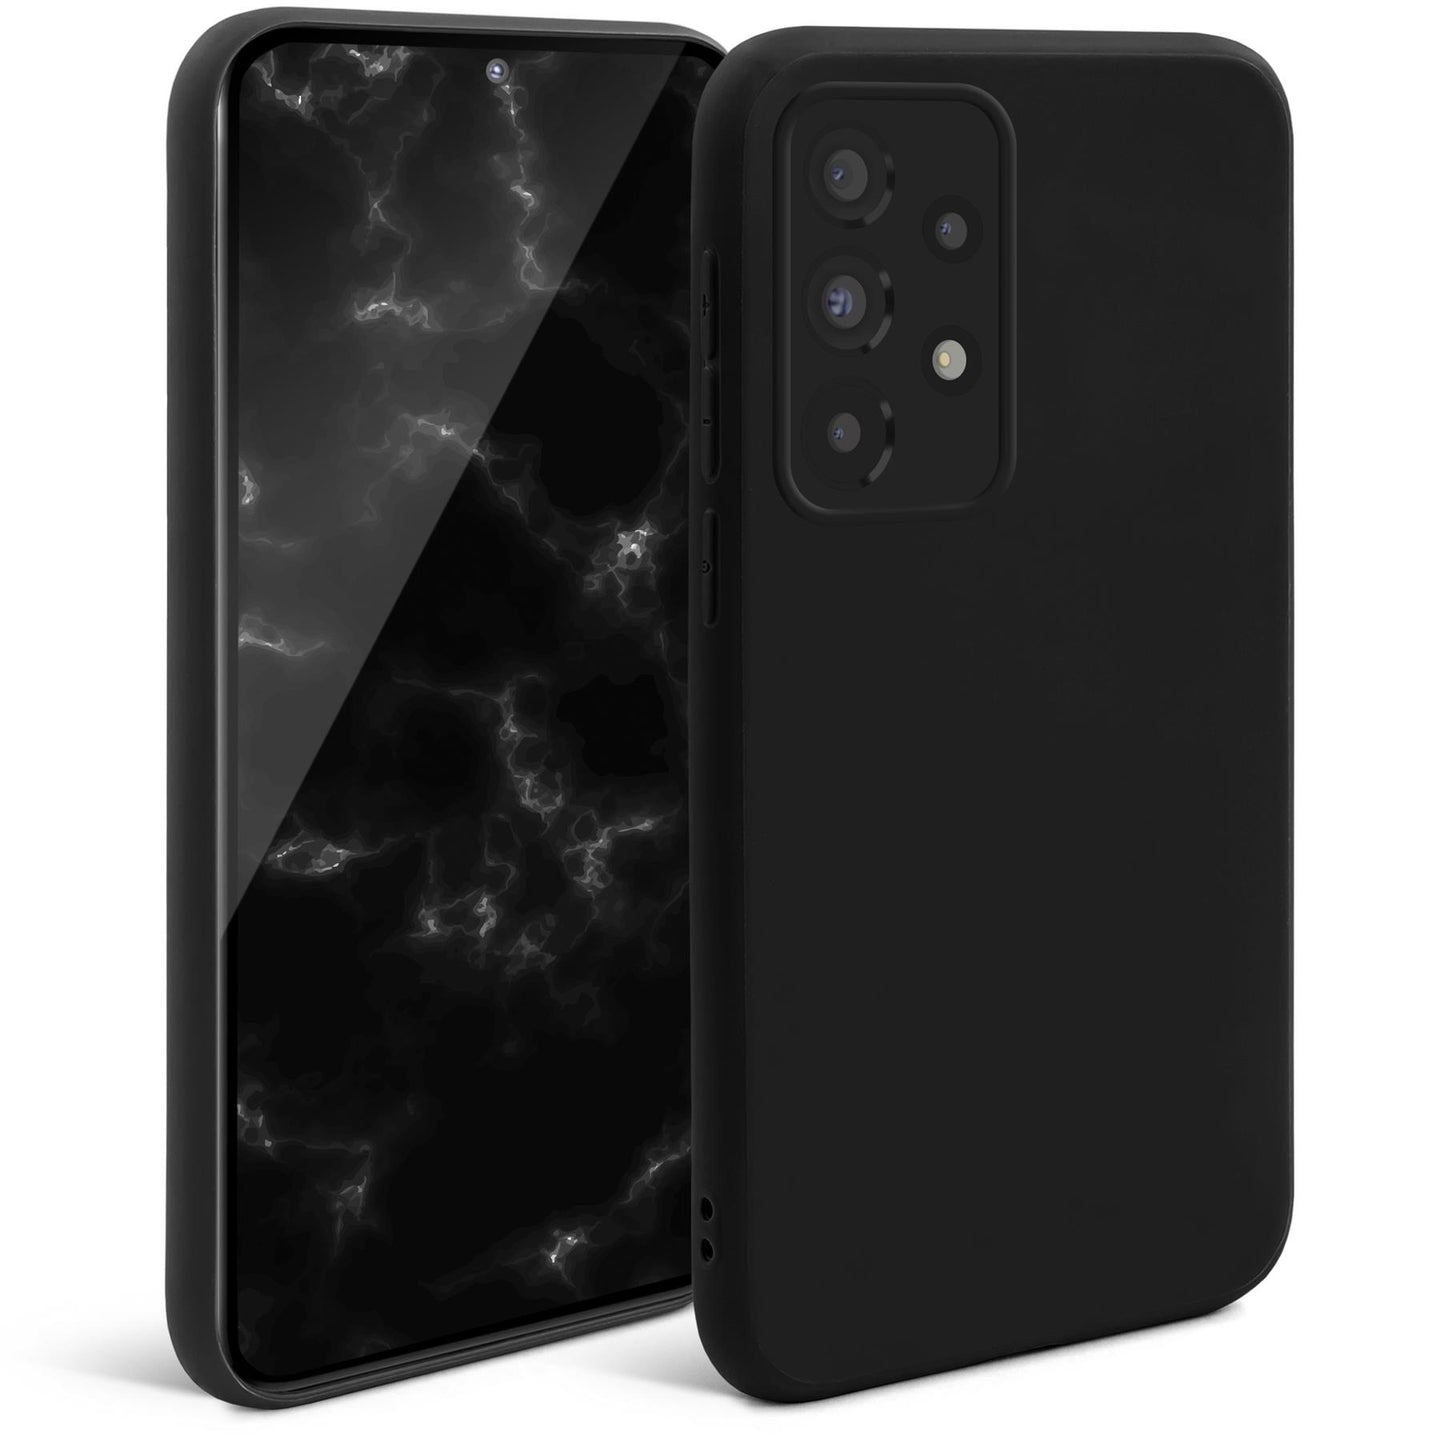 Moozy Minimalist Series Silicone Case for Samsung A53 5G, Black - Matte Finish Lightweight Mobile Phone Case Slim Soft Protective TPU Cover with Matte Surface